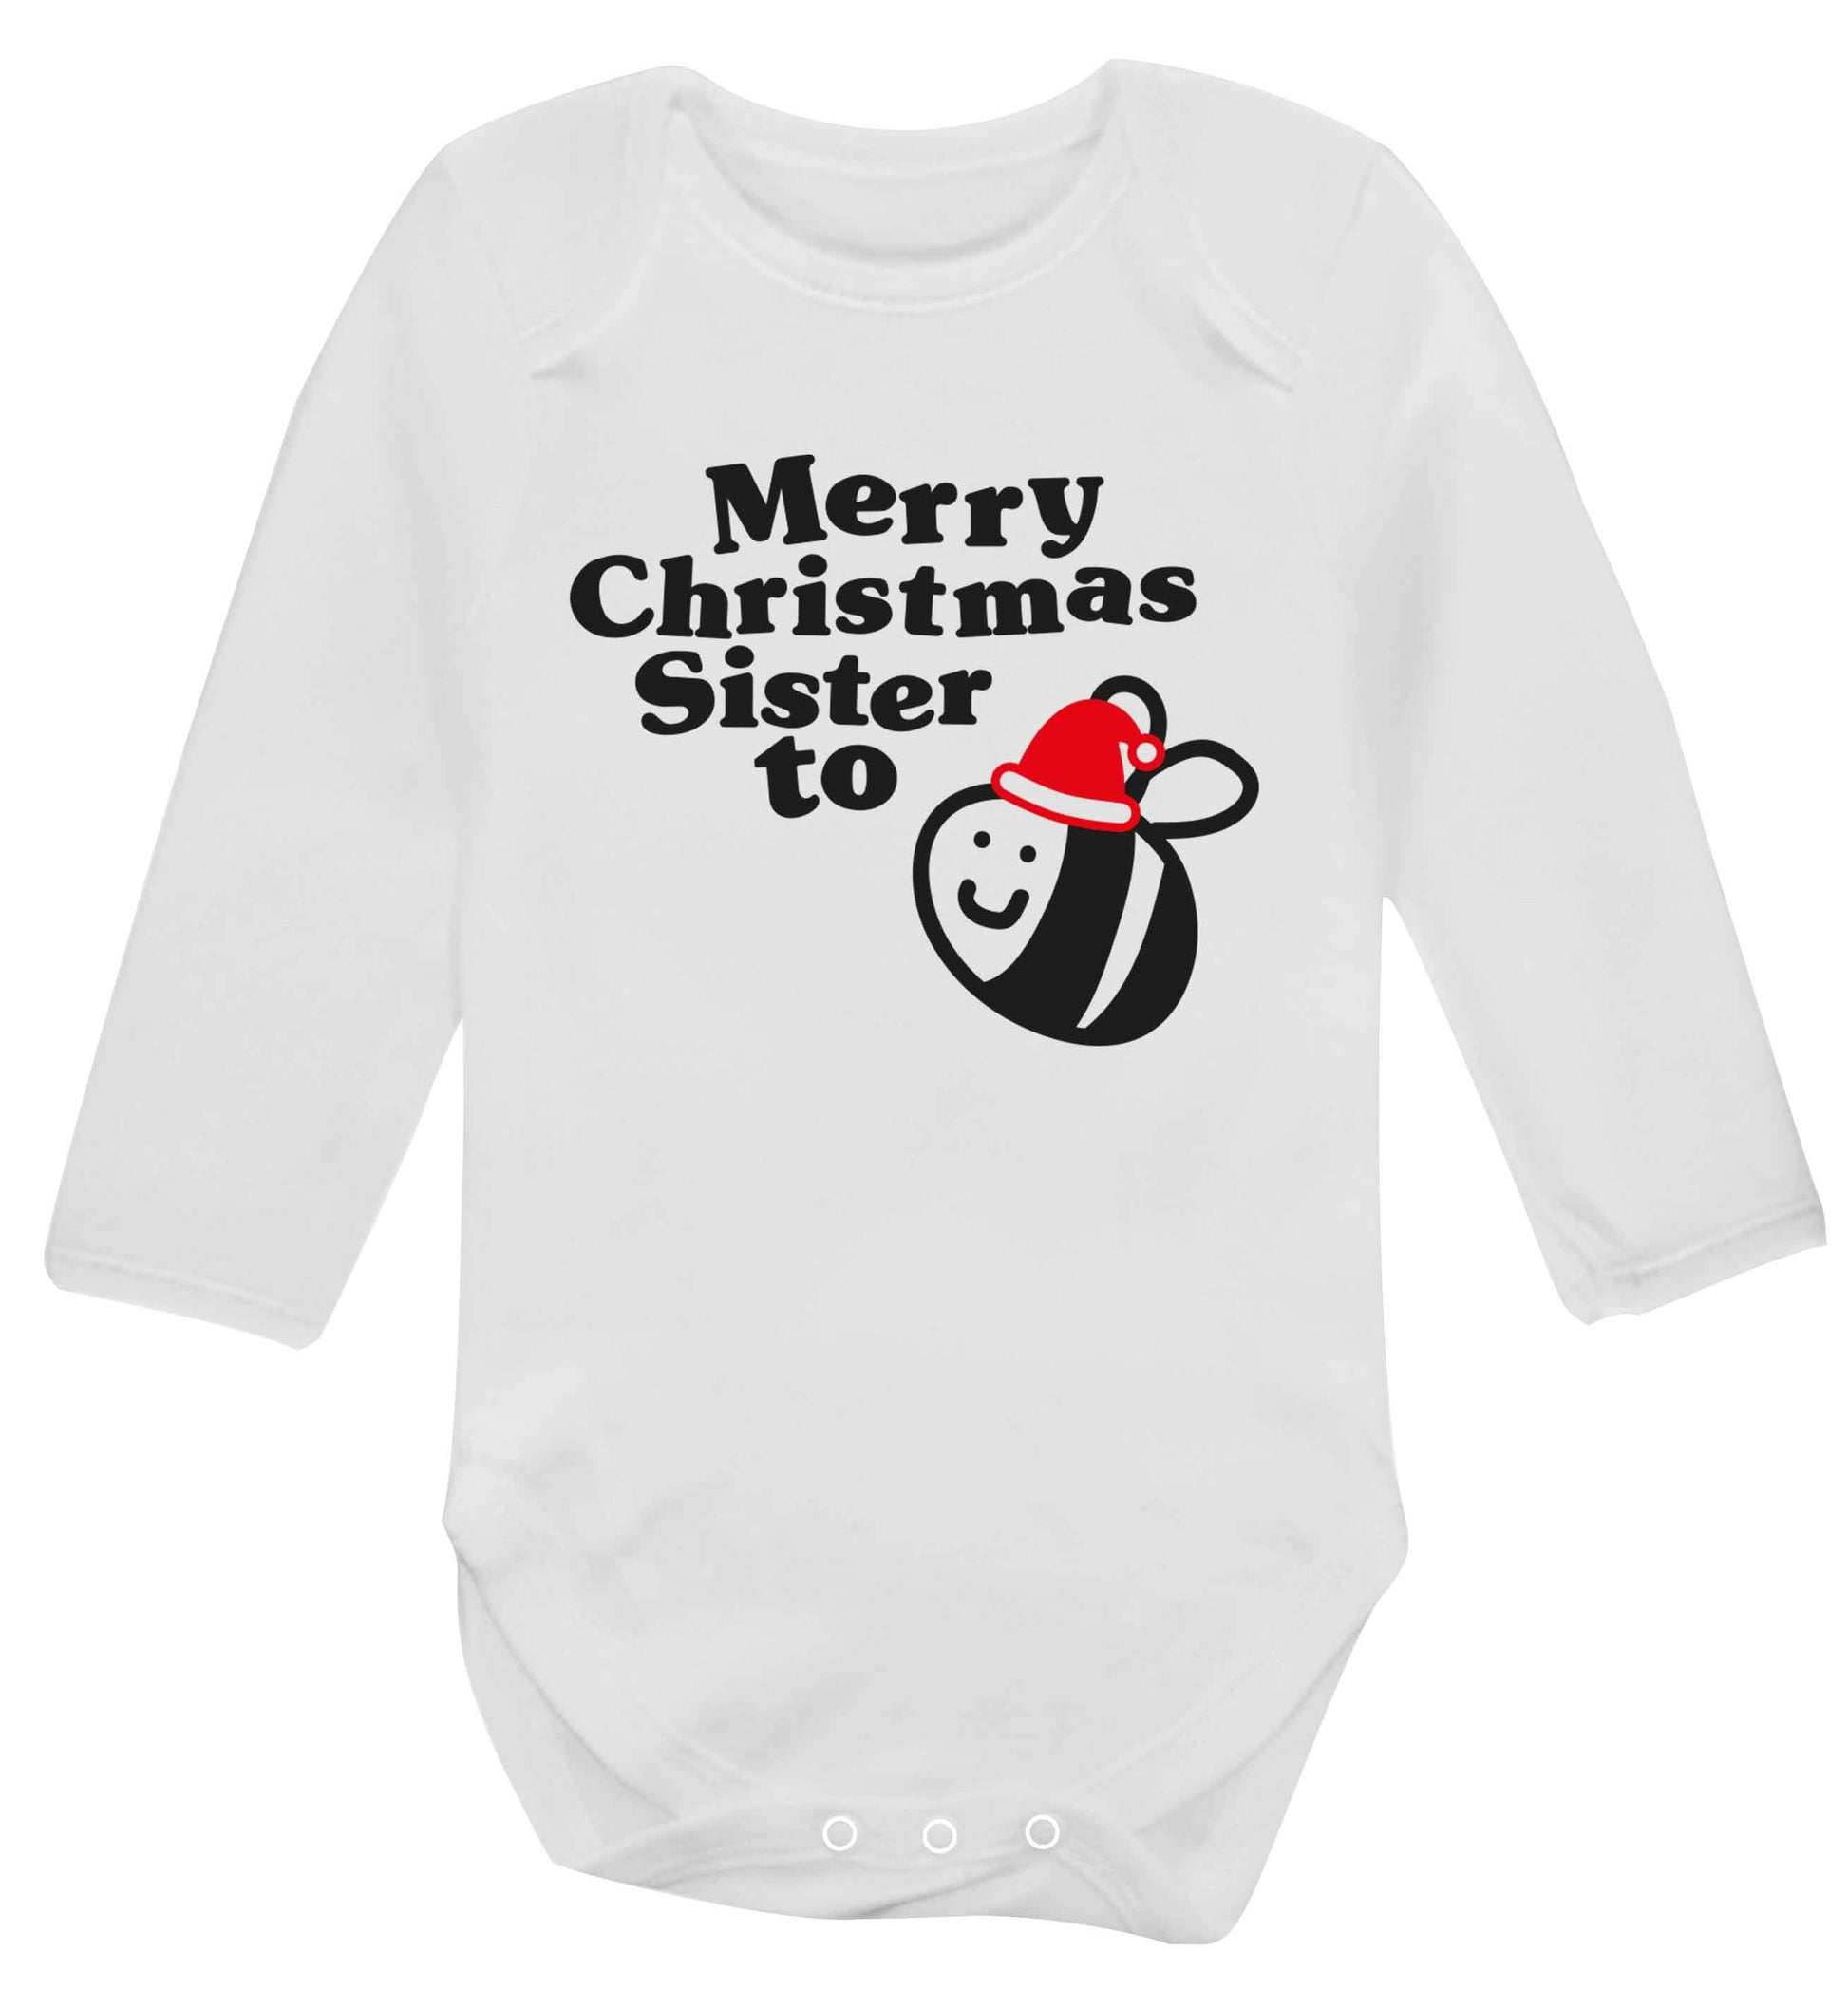 Merry Christmas sister to be Baby Vest long sleeved white 6-12 months